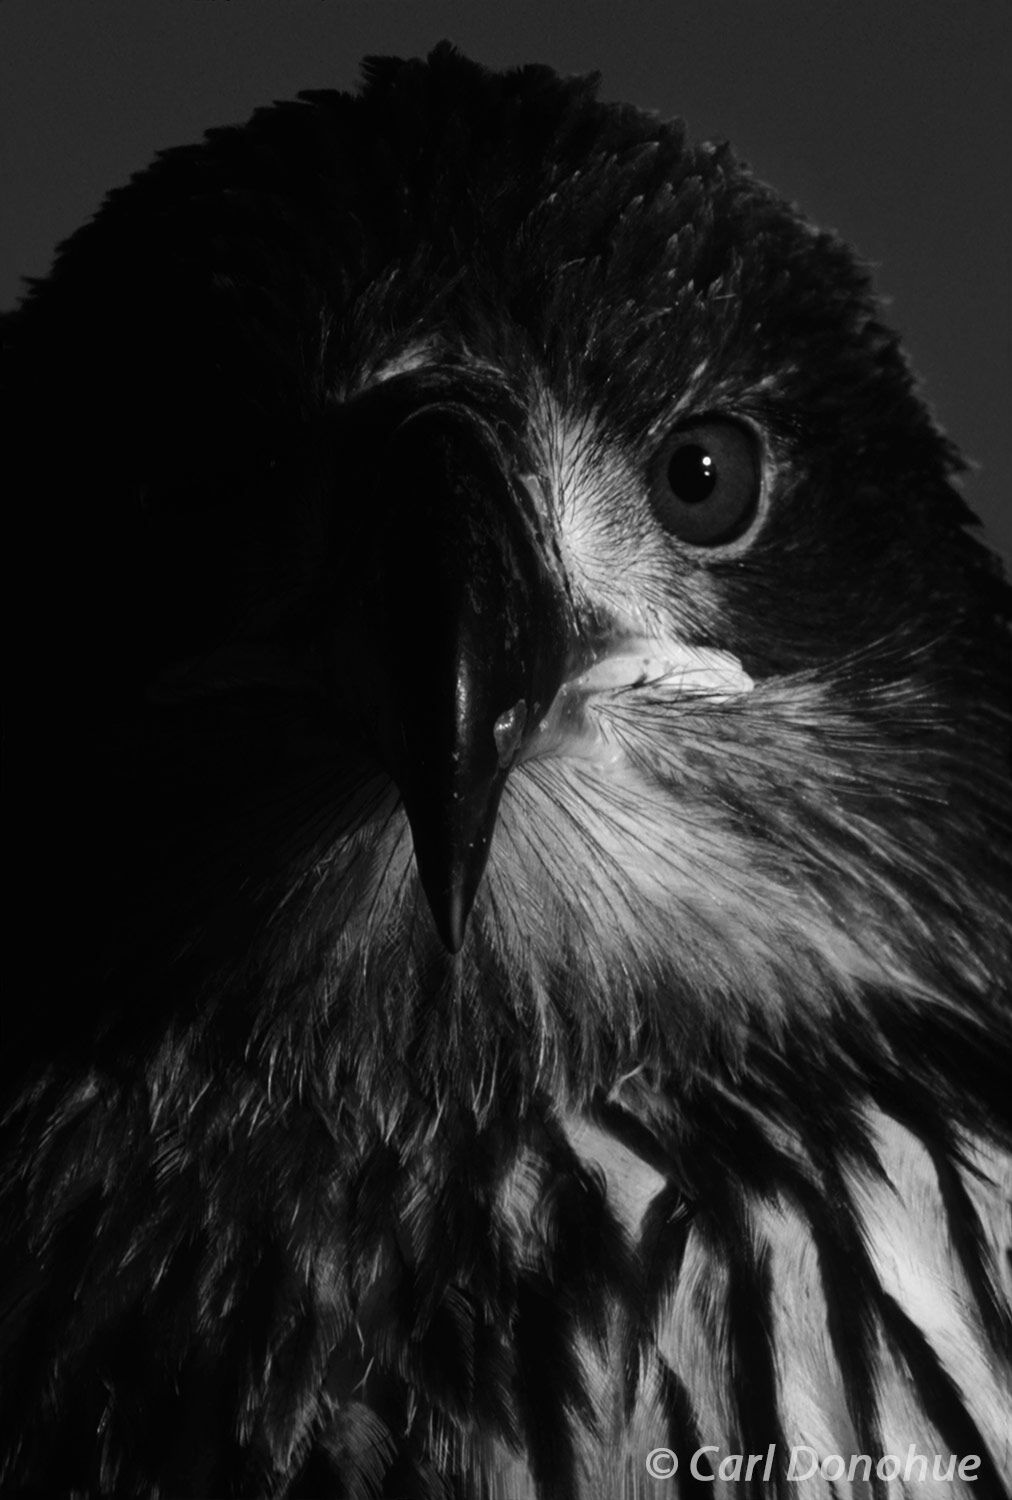 Juvenile bald eagle portrait, black and white photo, Homer, Alaska.  The bald eagle is an iconic species in Alaska, known for...